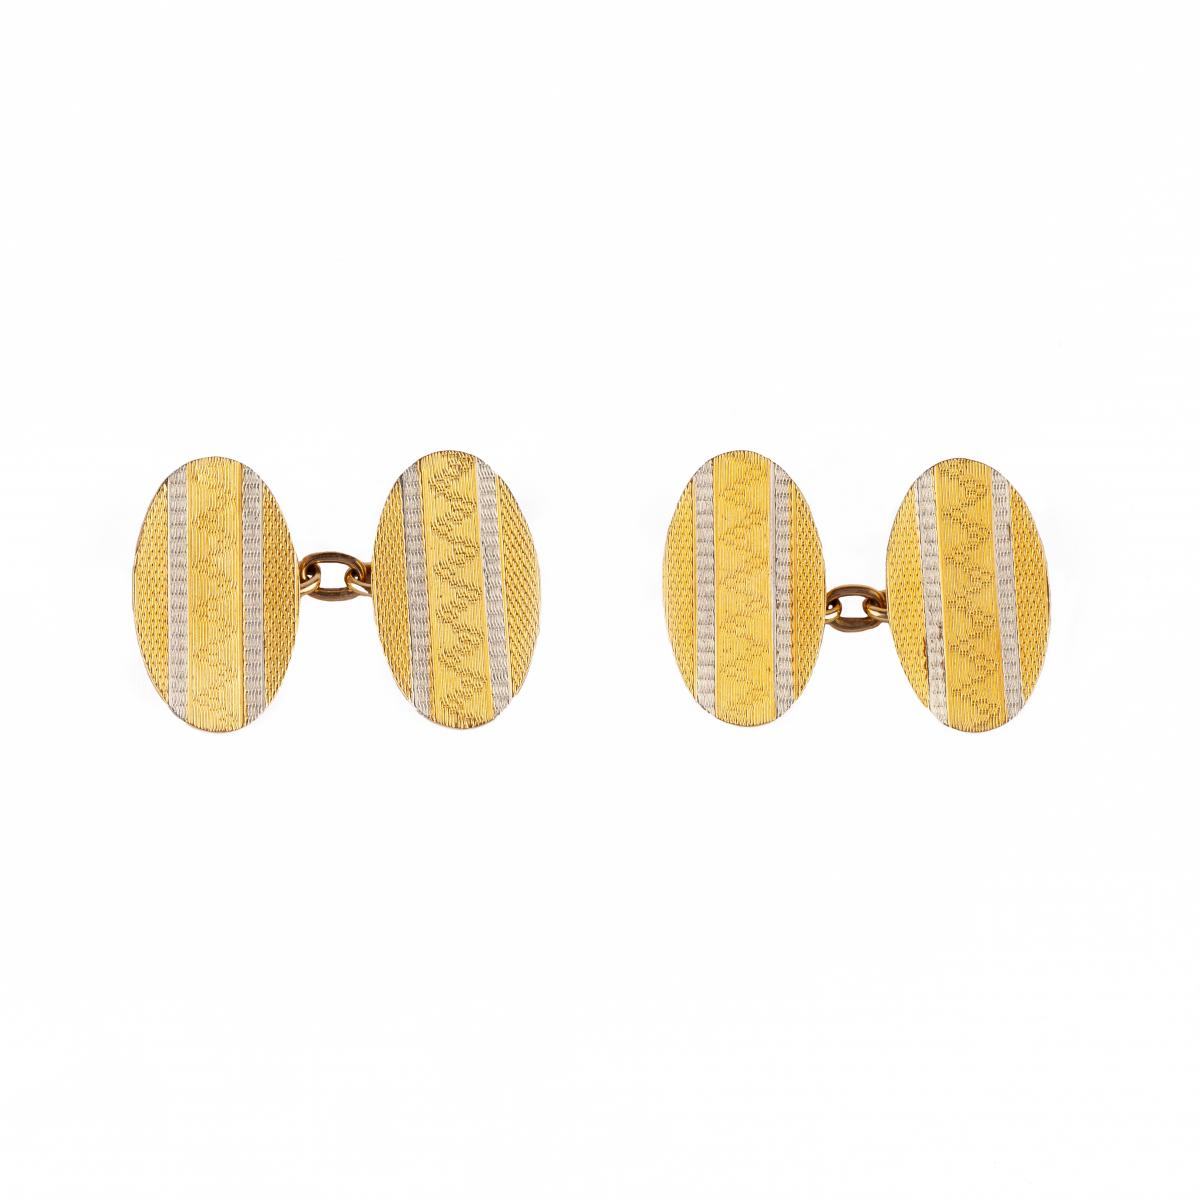 Classic Cufflinks in 18 Carat Gold & Platinum with Engraved Design, English dated 1914.